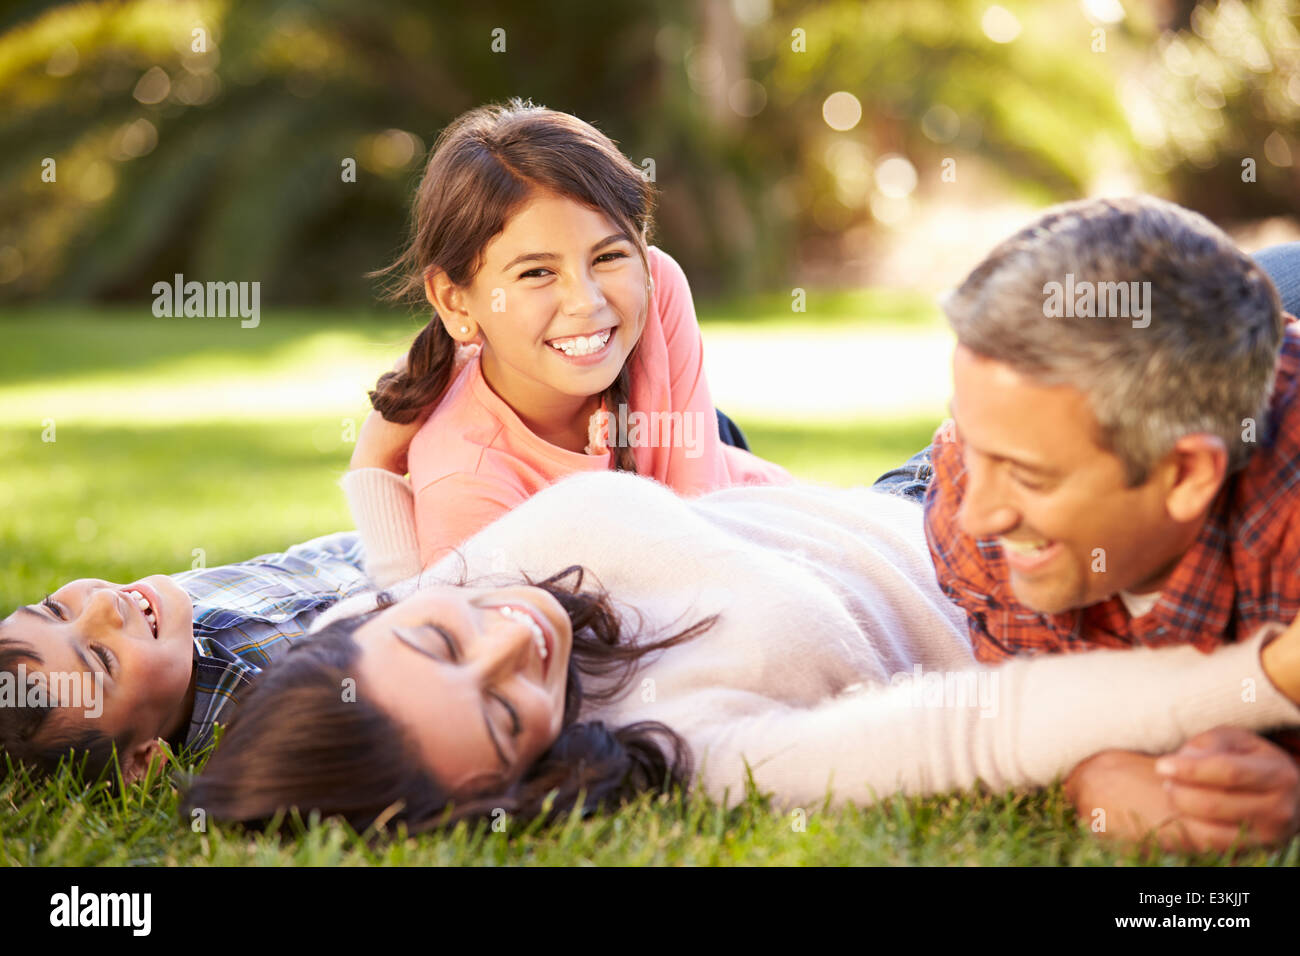 Family Lying On Grass In Countryside Stock Photo